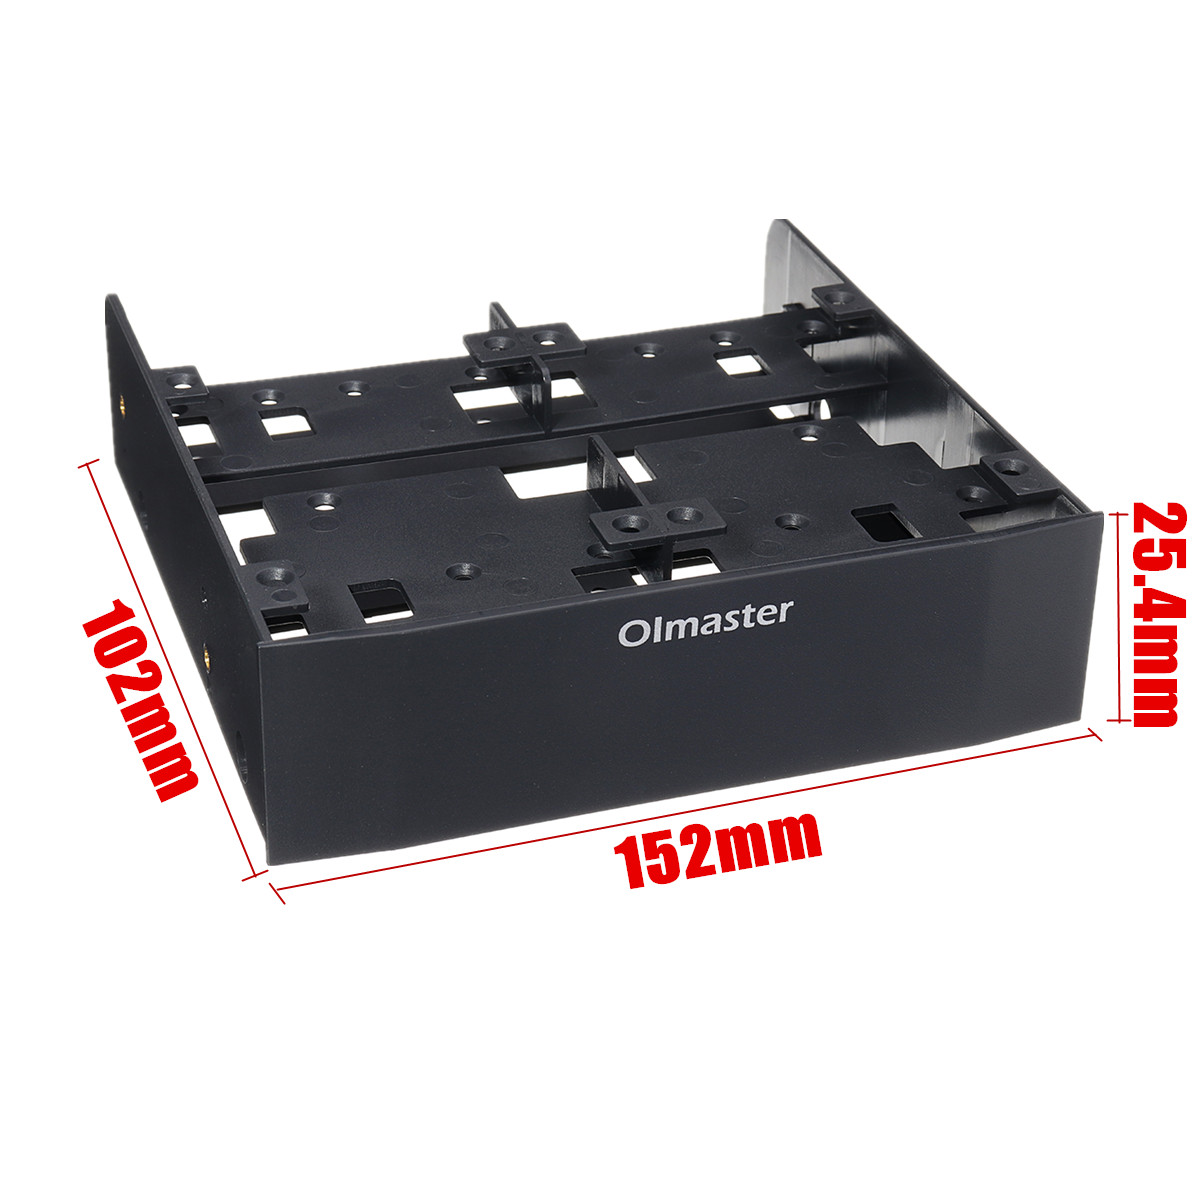 525quot-to-35quot-Optical-Drive-Bay-HDD-Hard-Drive-Mounting-Bracket-Converter-1326621